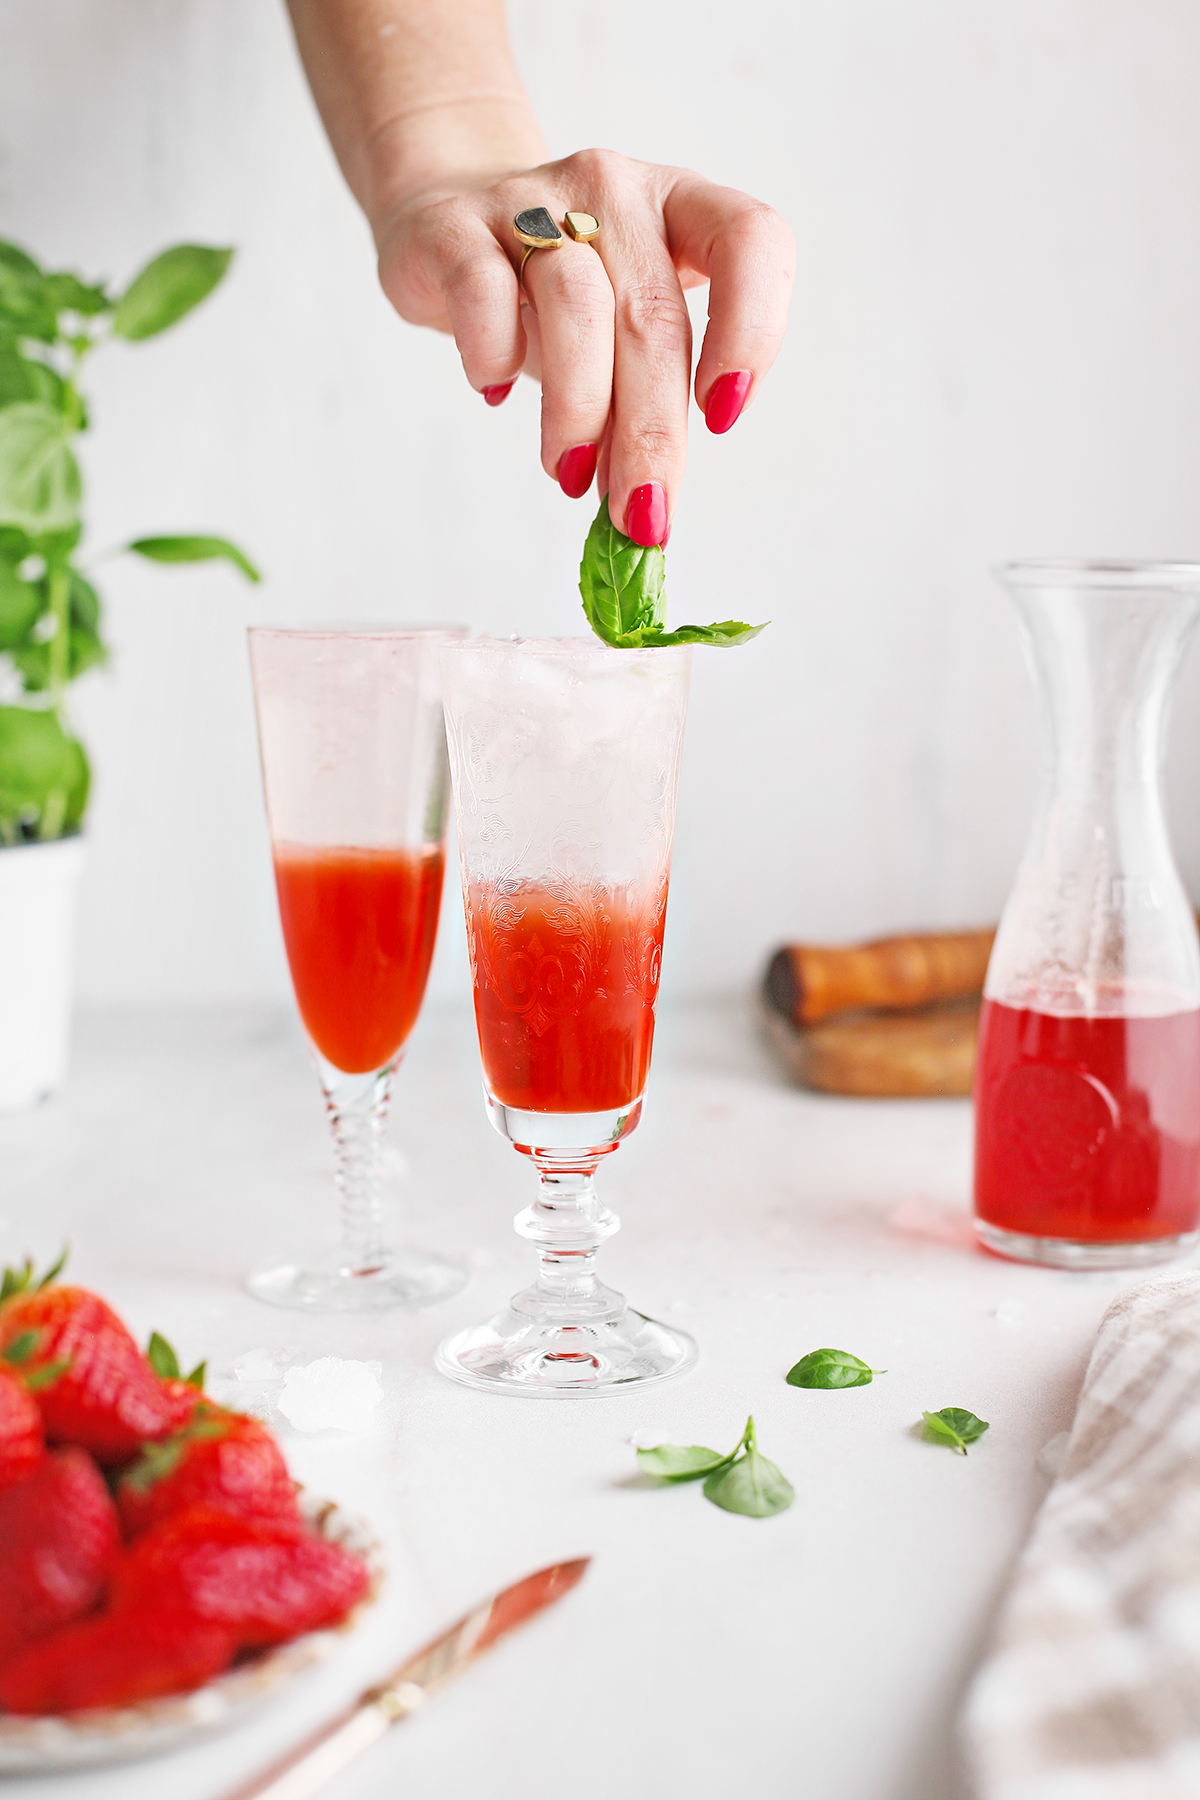 Strawberry-Basil-Cocktail-with-Gin | Good Life Eats